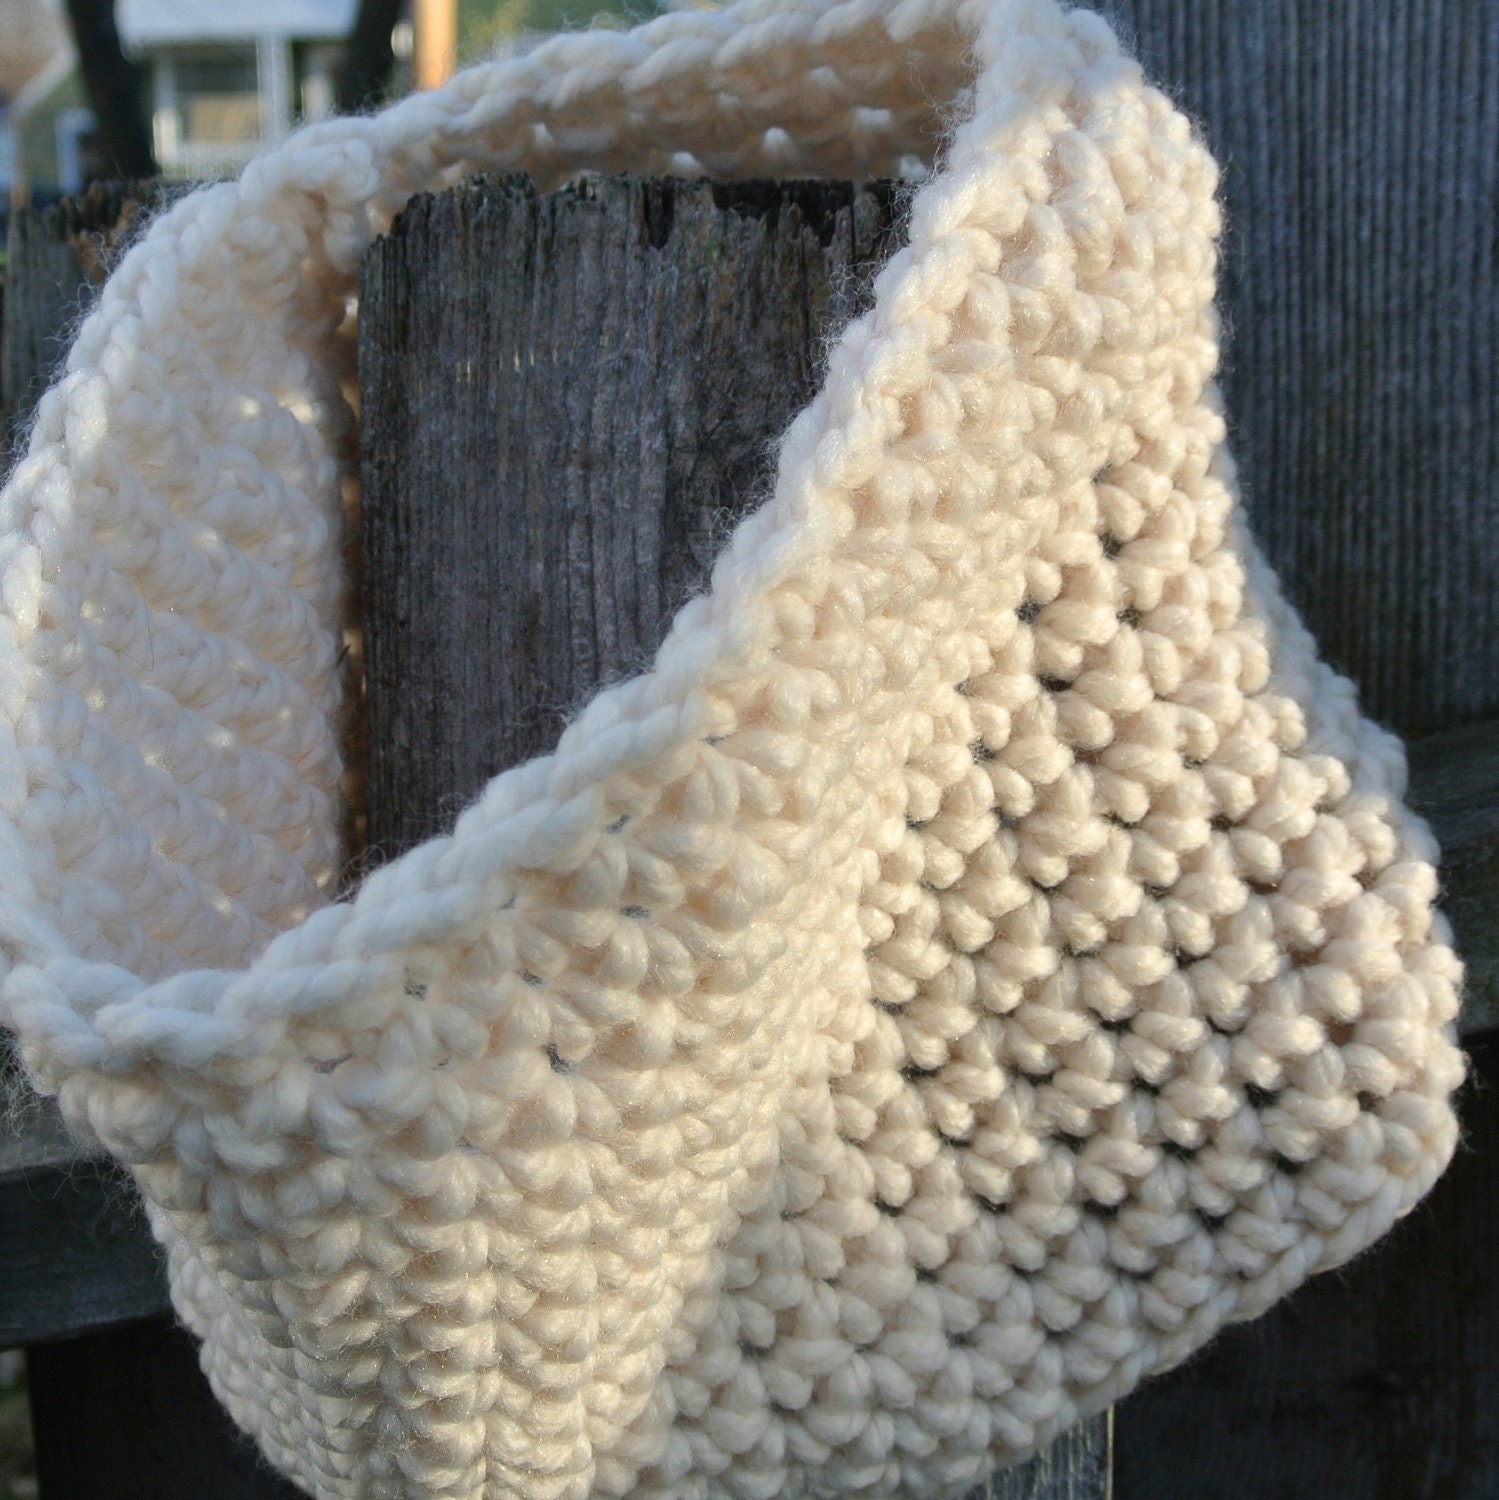 SALE Black Friday/Cyber Monday- White Cowl, Crocheted Neck Warmer in Ivory - KnitMomWi